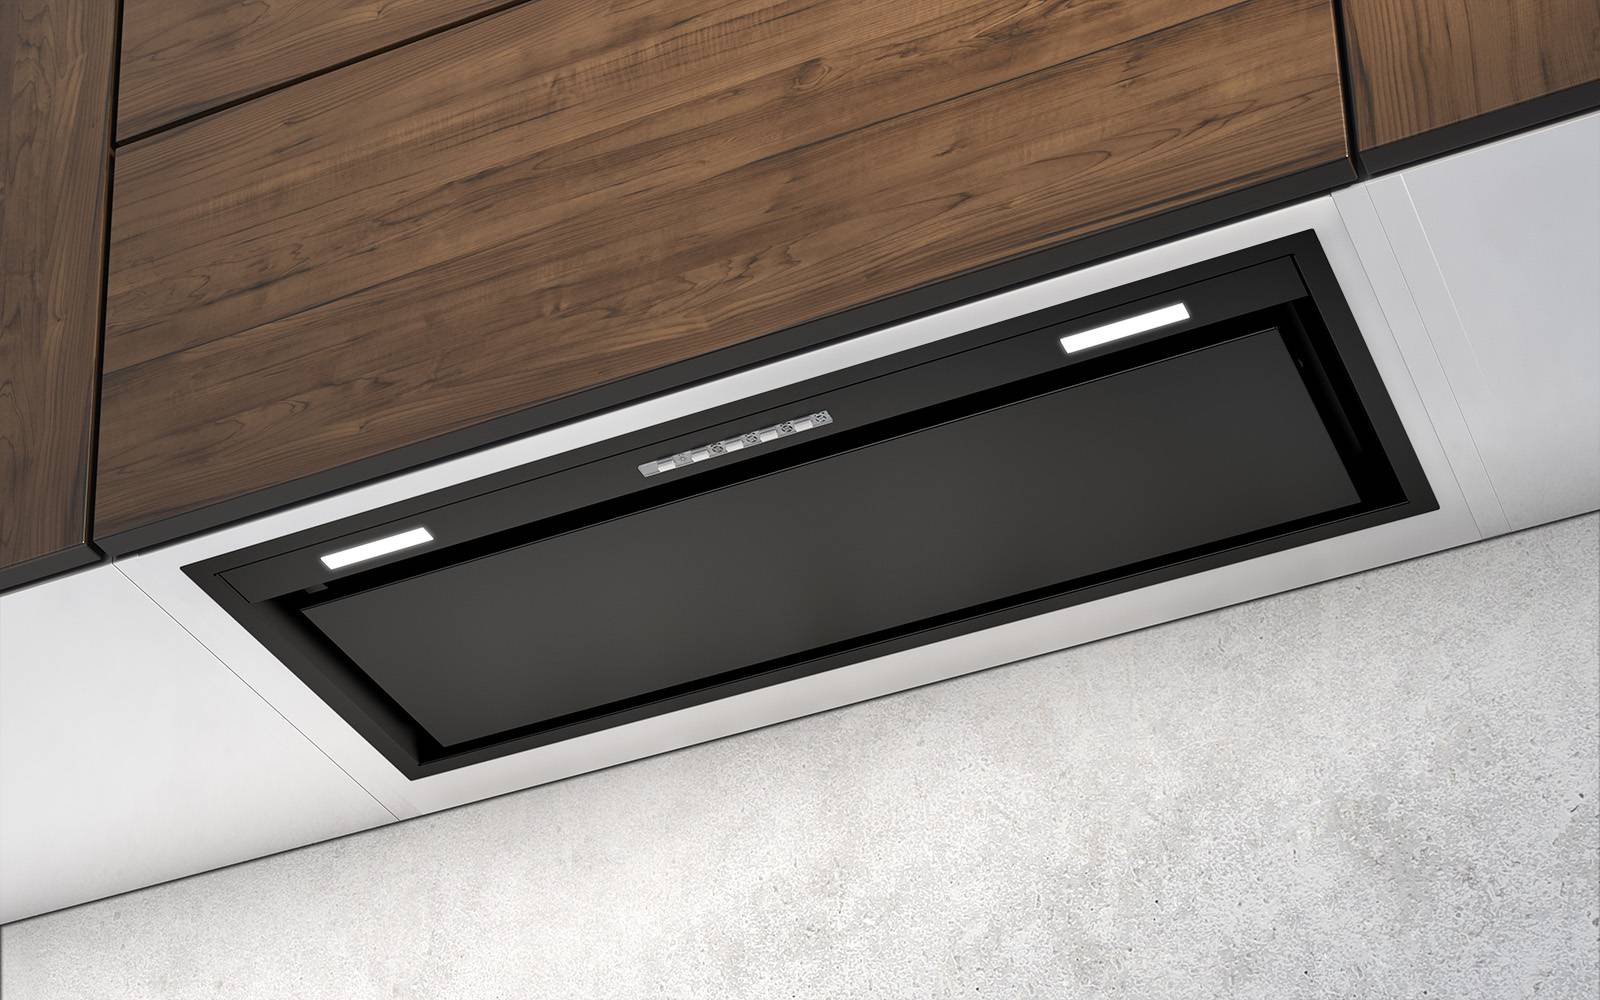 Airforce Modulo Plus 72cm Built in touch control Cooker hood with integra system- Black finish